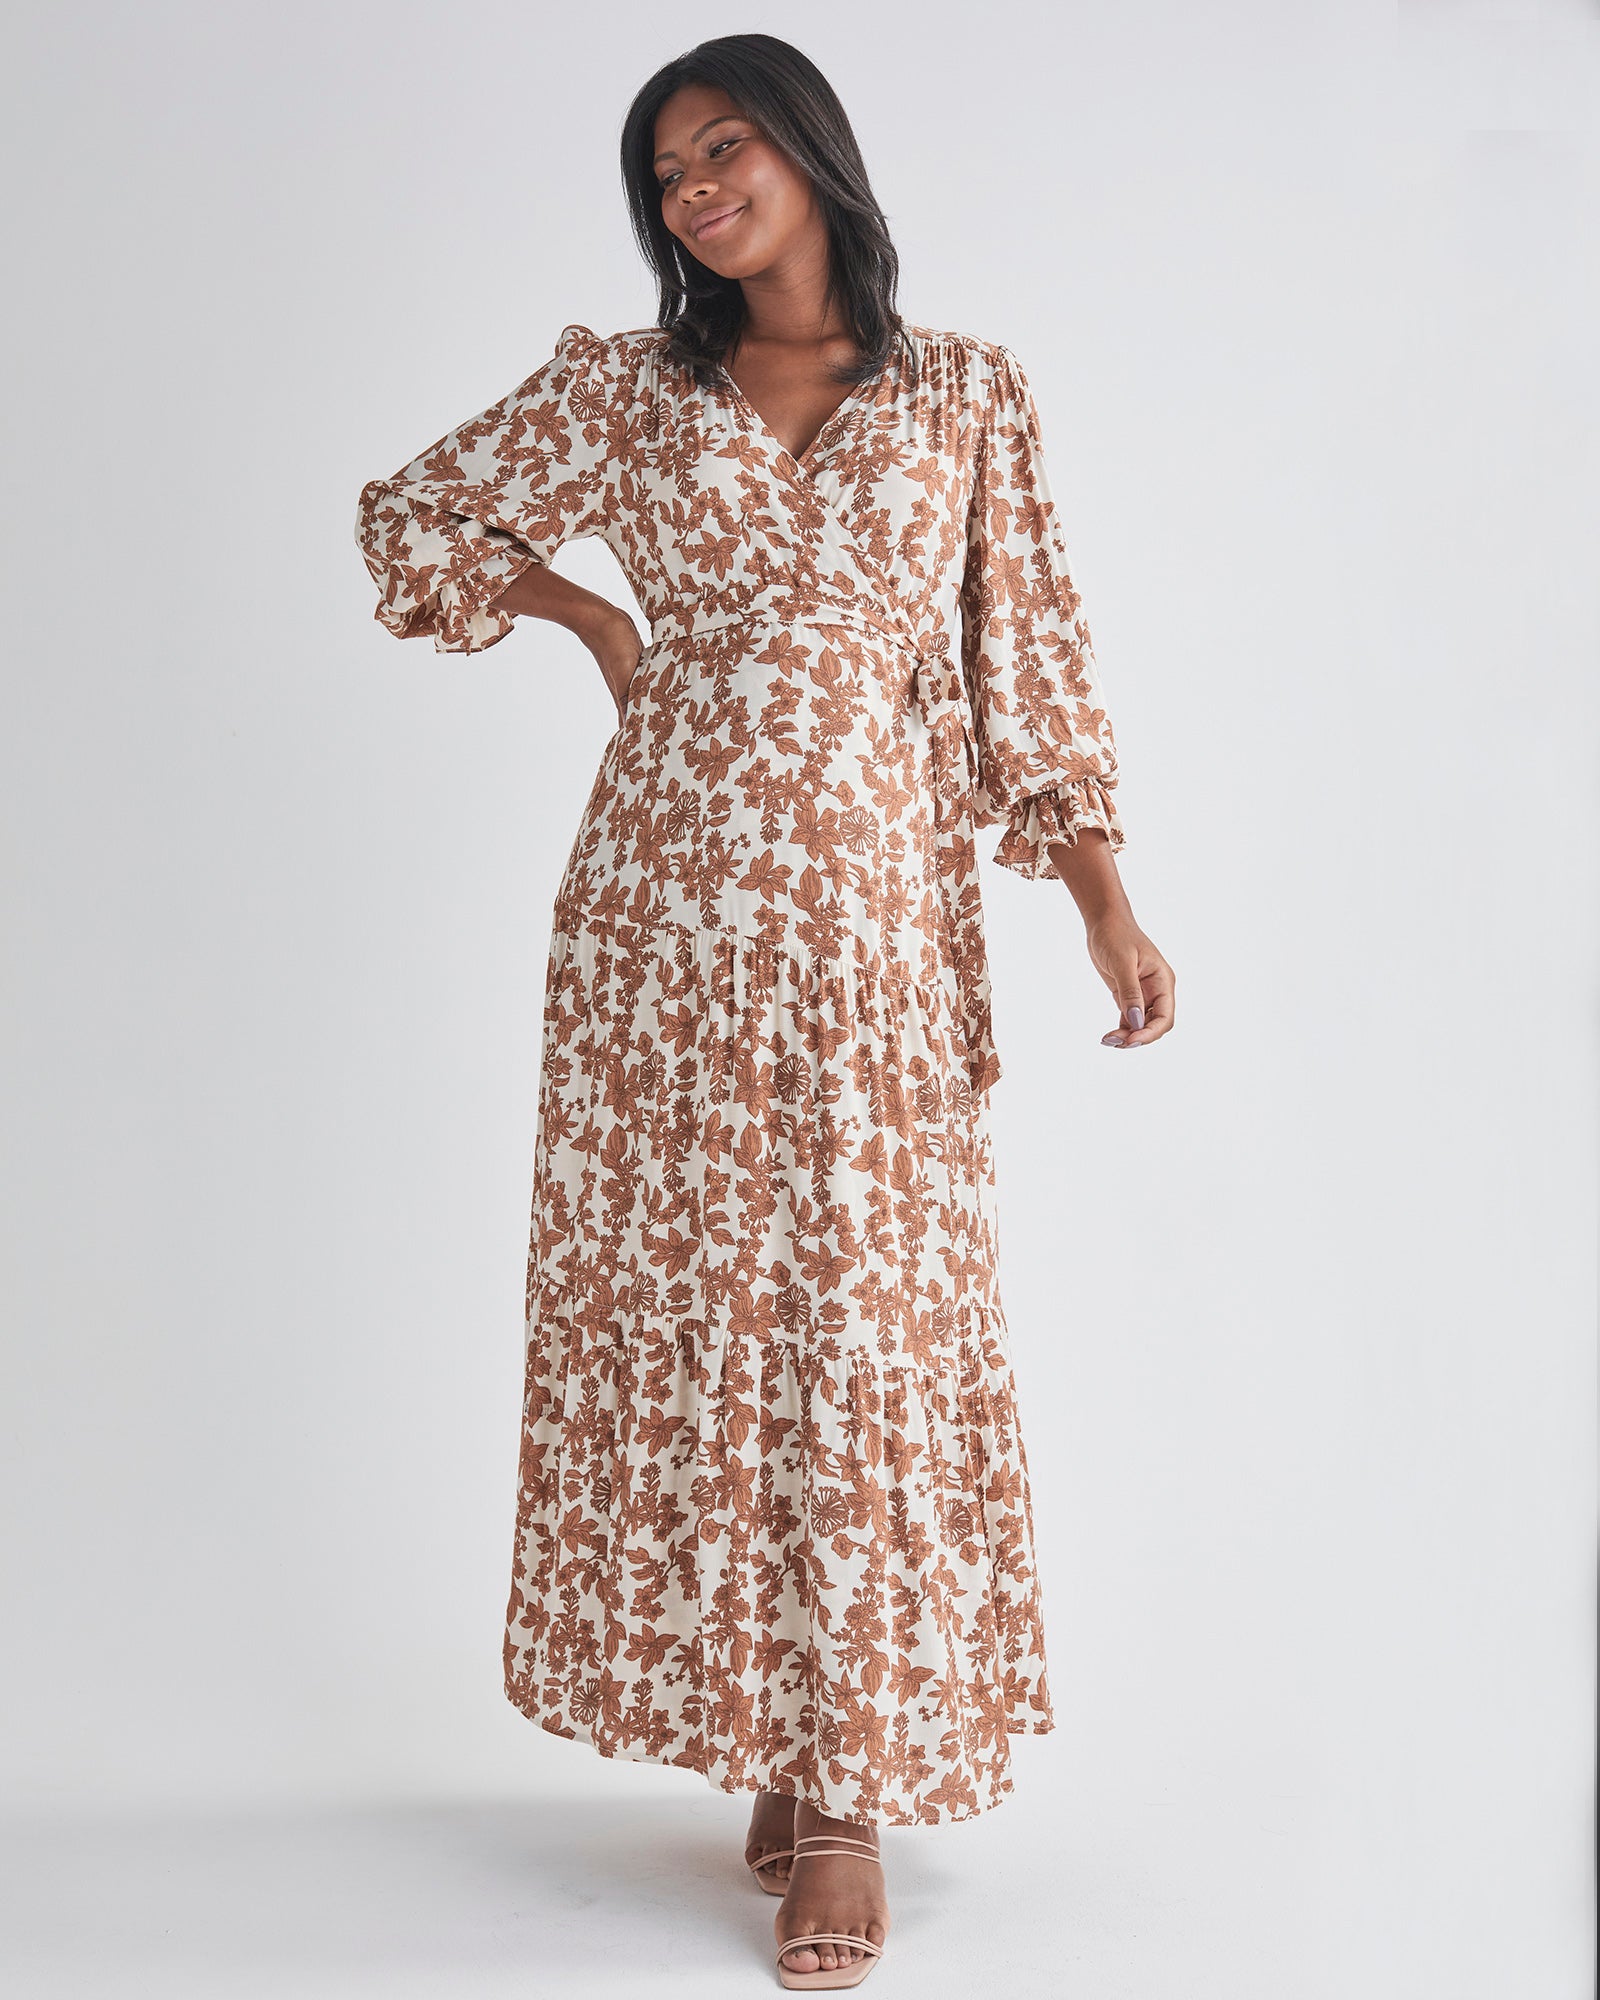 Main view-Maternity and nursing -Maxi length- Nude Floral Print- Wrap Dress with Tie-Sleeve Relaxed Fit from AngelMaternity